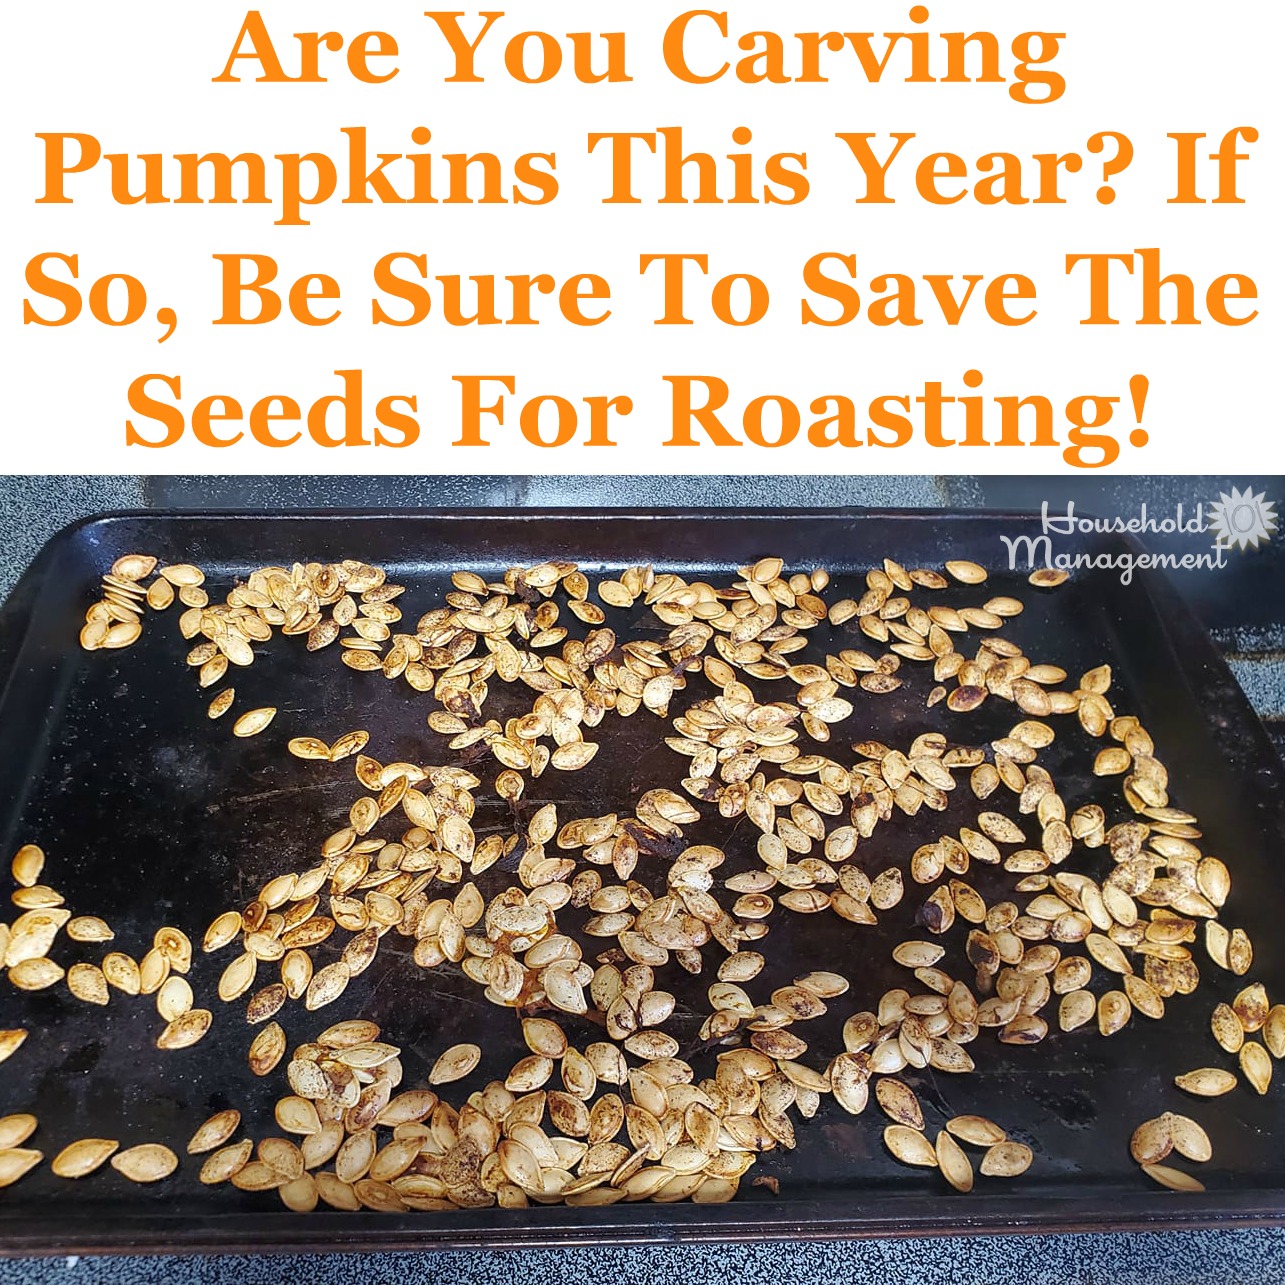 Make sure to save the pumpkin seeds for roasting this season, when you carve pumpkins. Here's how to do it! {on Household Management 101}